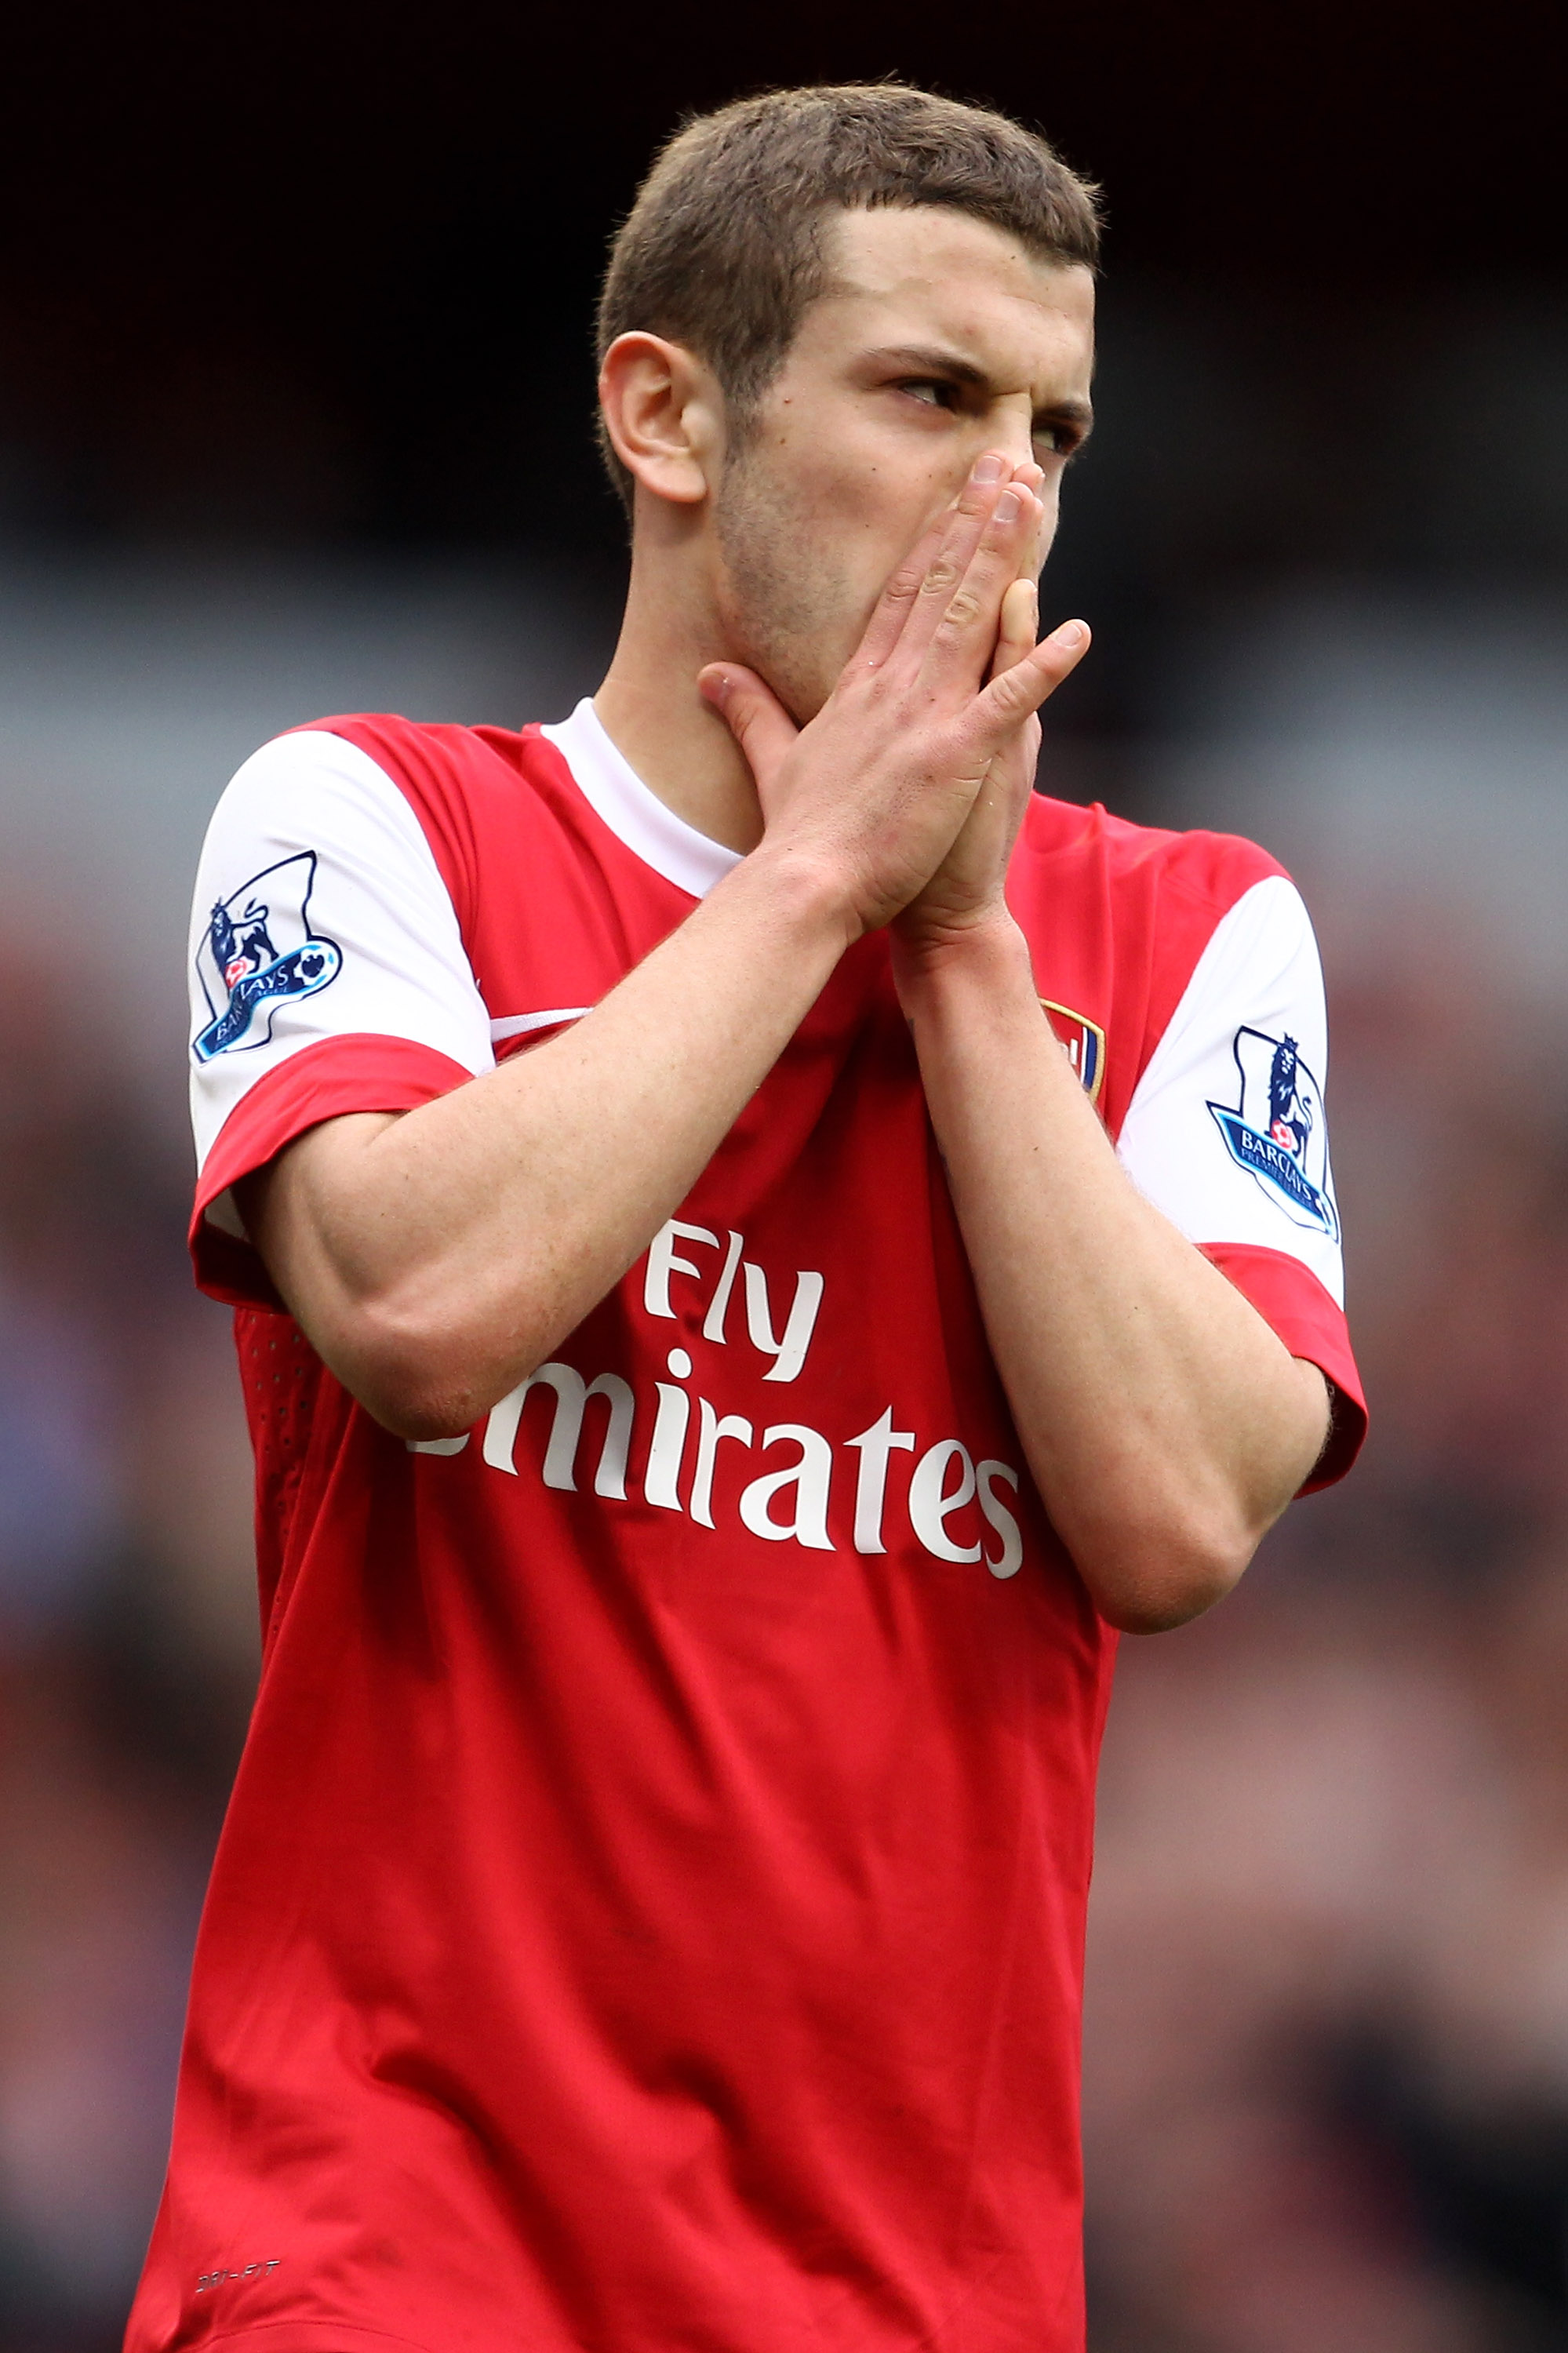 LONDON, ENGLAND - APRIL 02:  Jack Wilshere of Arsenal reacts after a missed oppurtunity during the Barclays Premier League match between Arsenal and Blackburn Rovers at the Emirates Stadium on April 2, 2011 in London, England.  (Photo by Julian Finney/Get